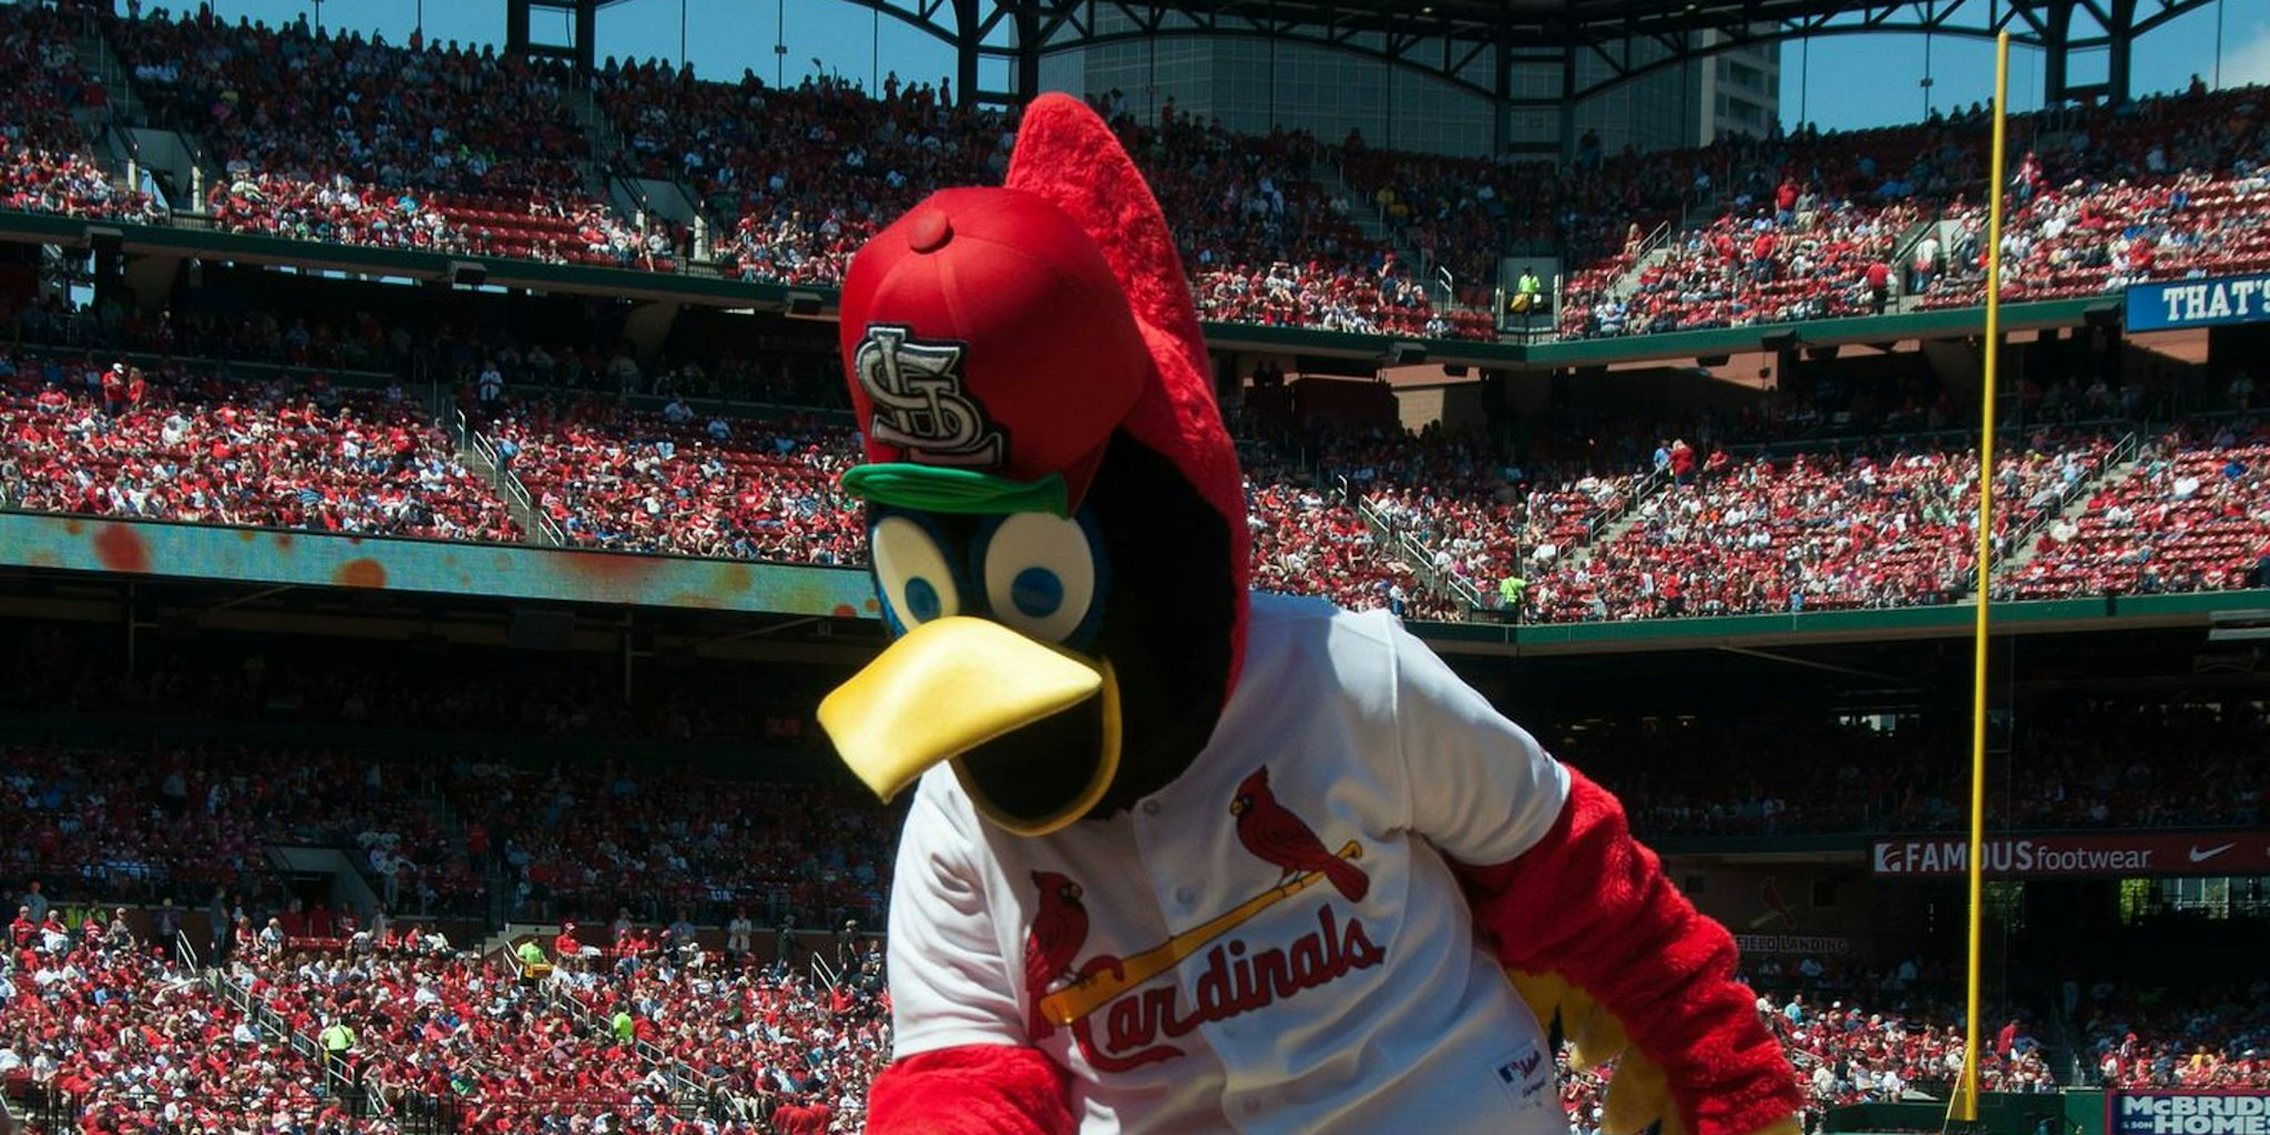 The Cardinals want the St. Louis PD to stop using their mascot in  #PoliceLivesMatter photos - The Daily Dot